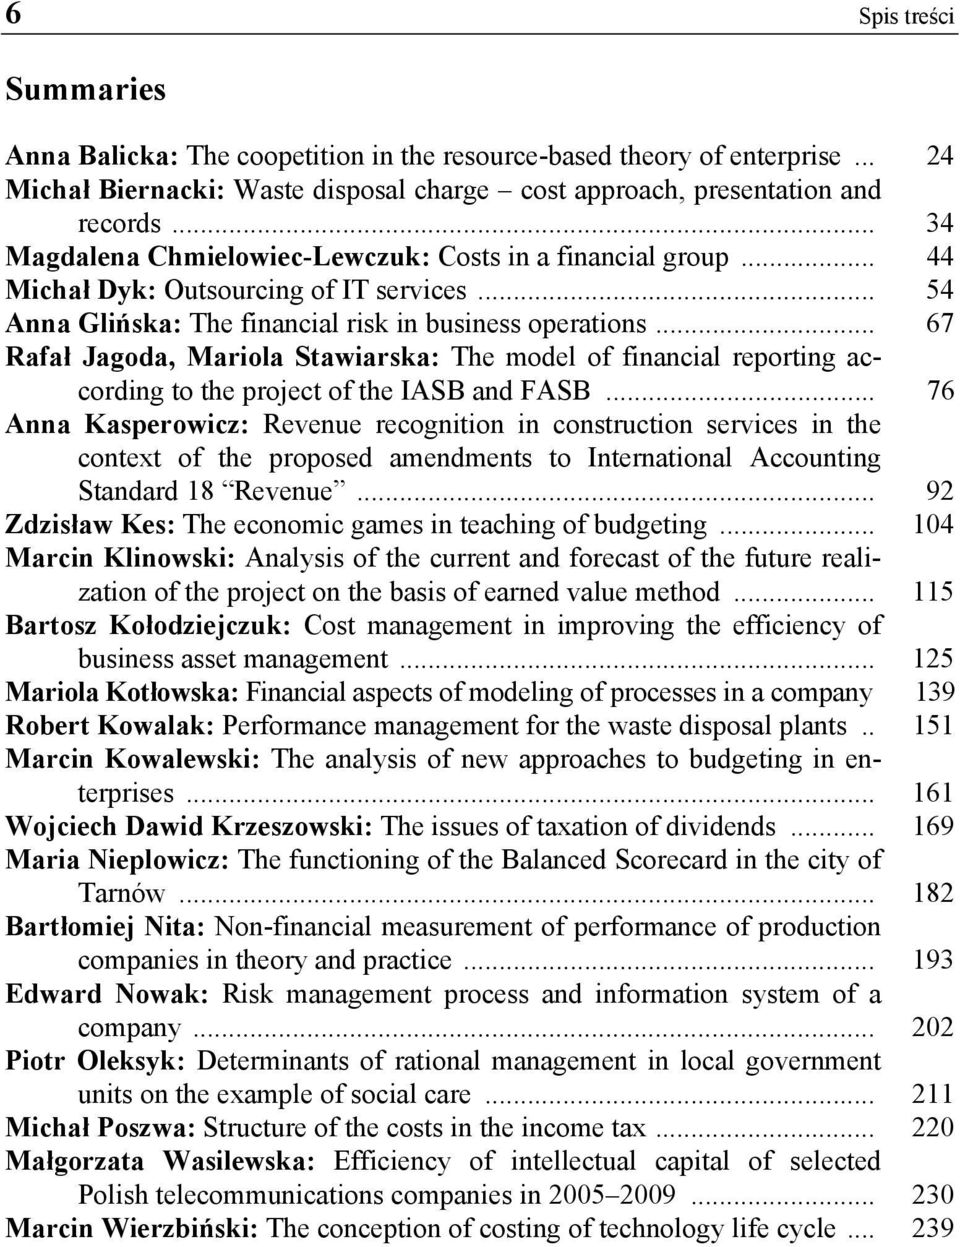 .. 67 Rafał Jagoda, Mariola Stawiarska: The model of financial reporting according to the project of the IASB and FASB.